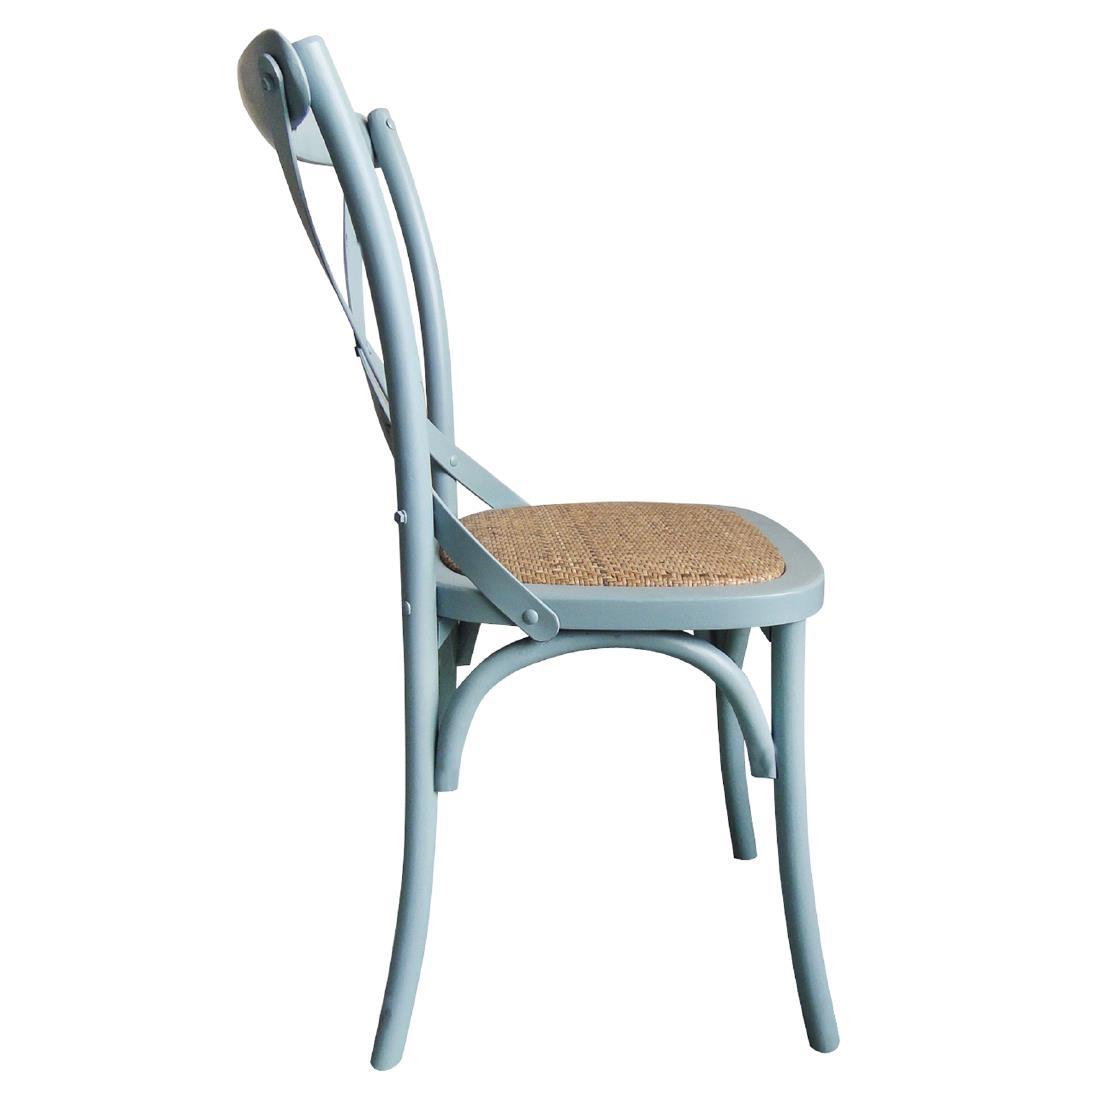 Bolero Blue Bentwood Chairs with Metal Cross Backrest (Pack of 2) - GG655  - 3